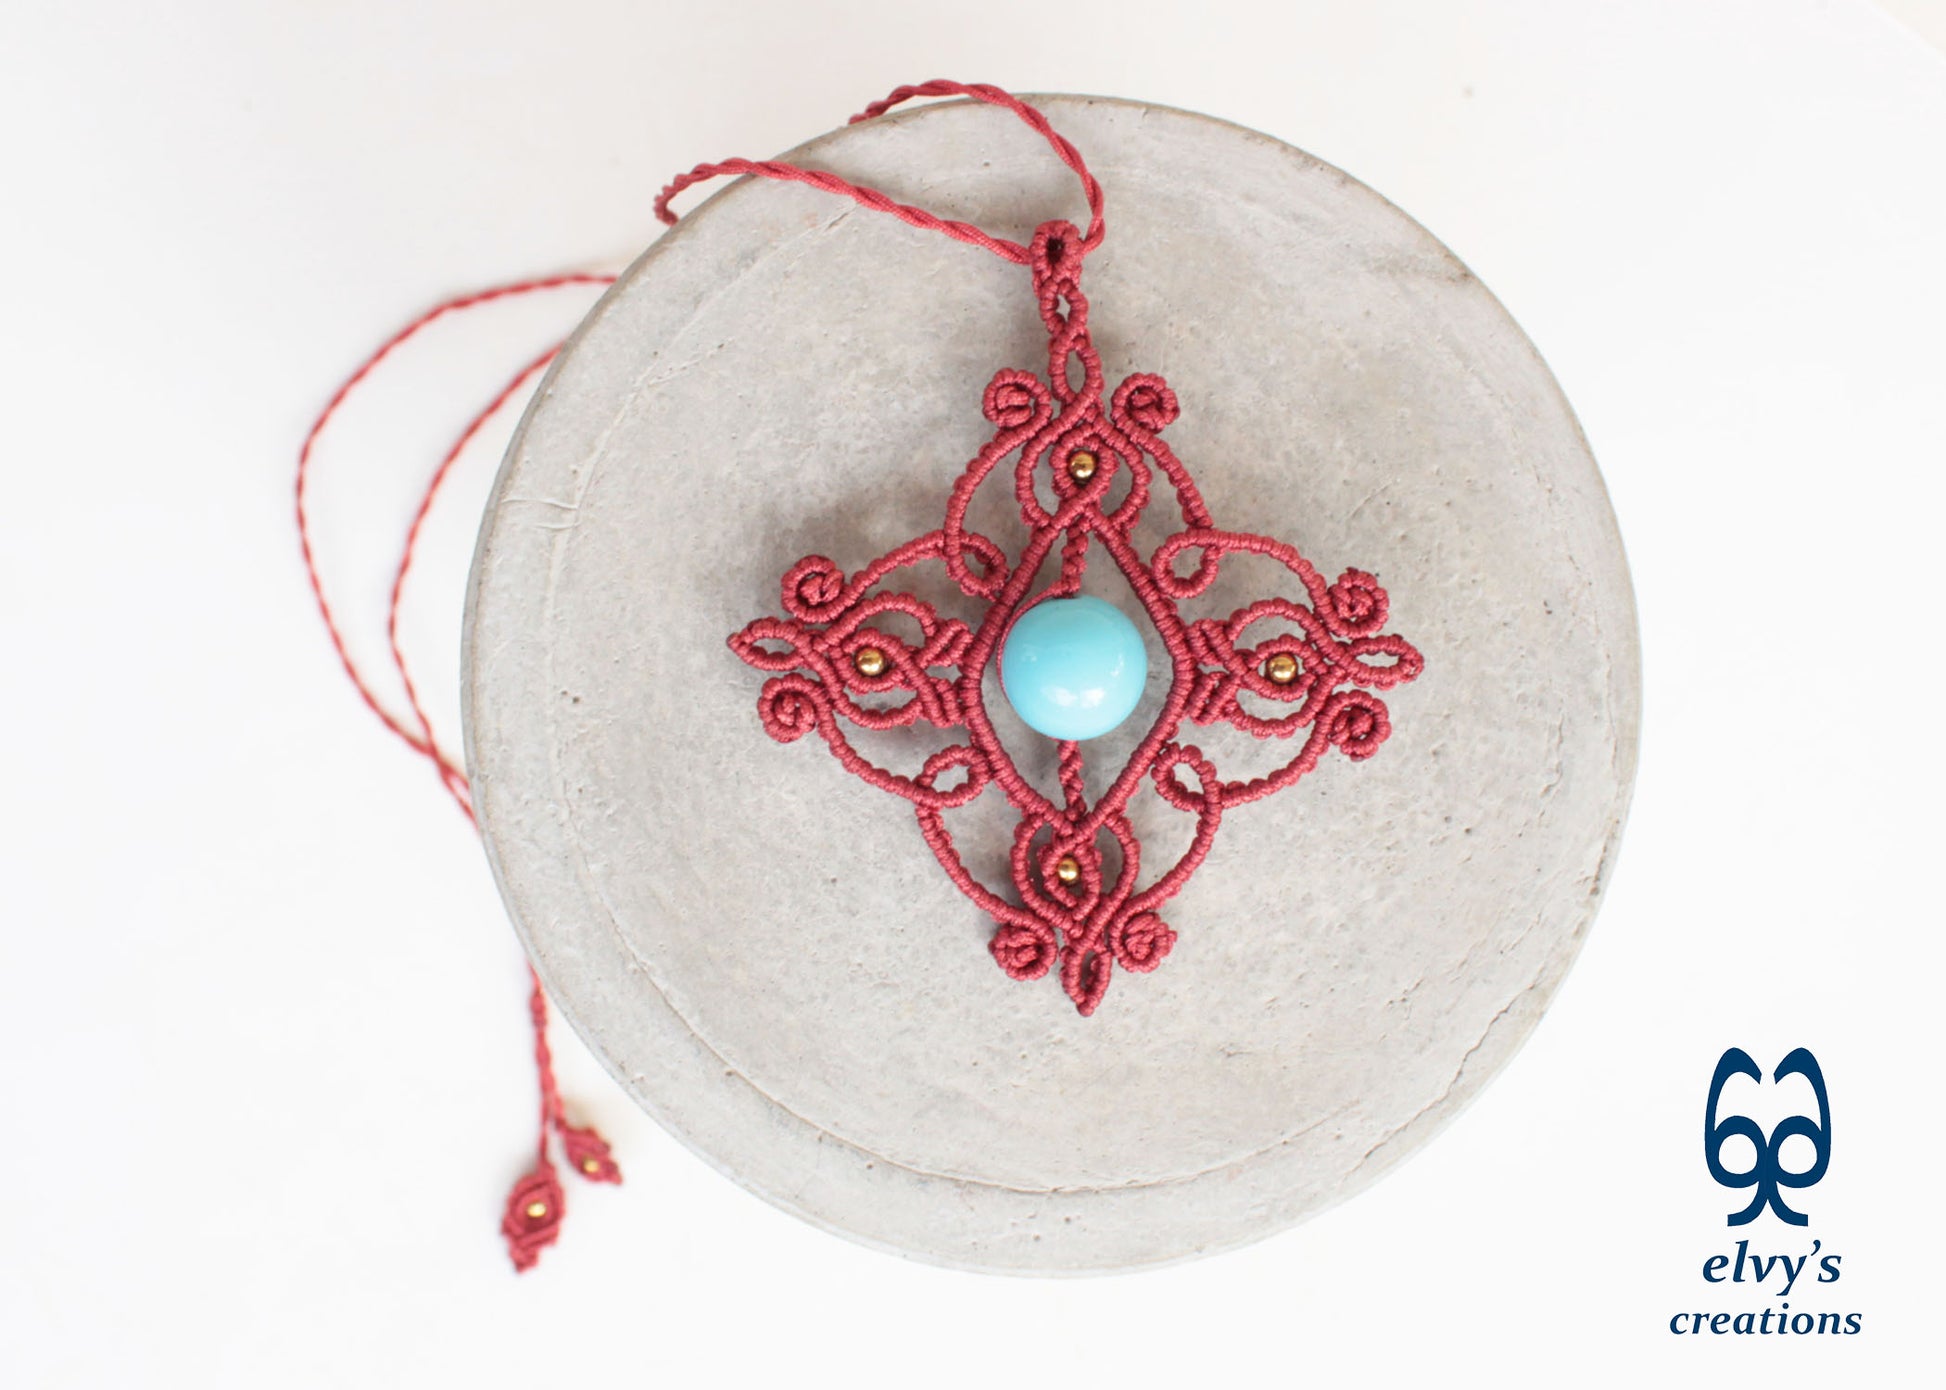 Handmade Clay Red Macramé Necklace with Blue Turquoise Gemstones